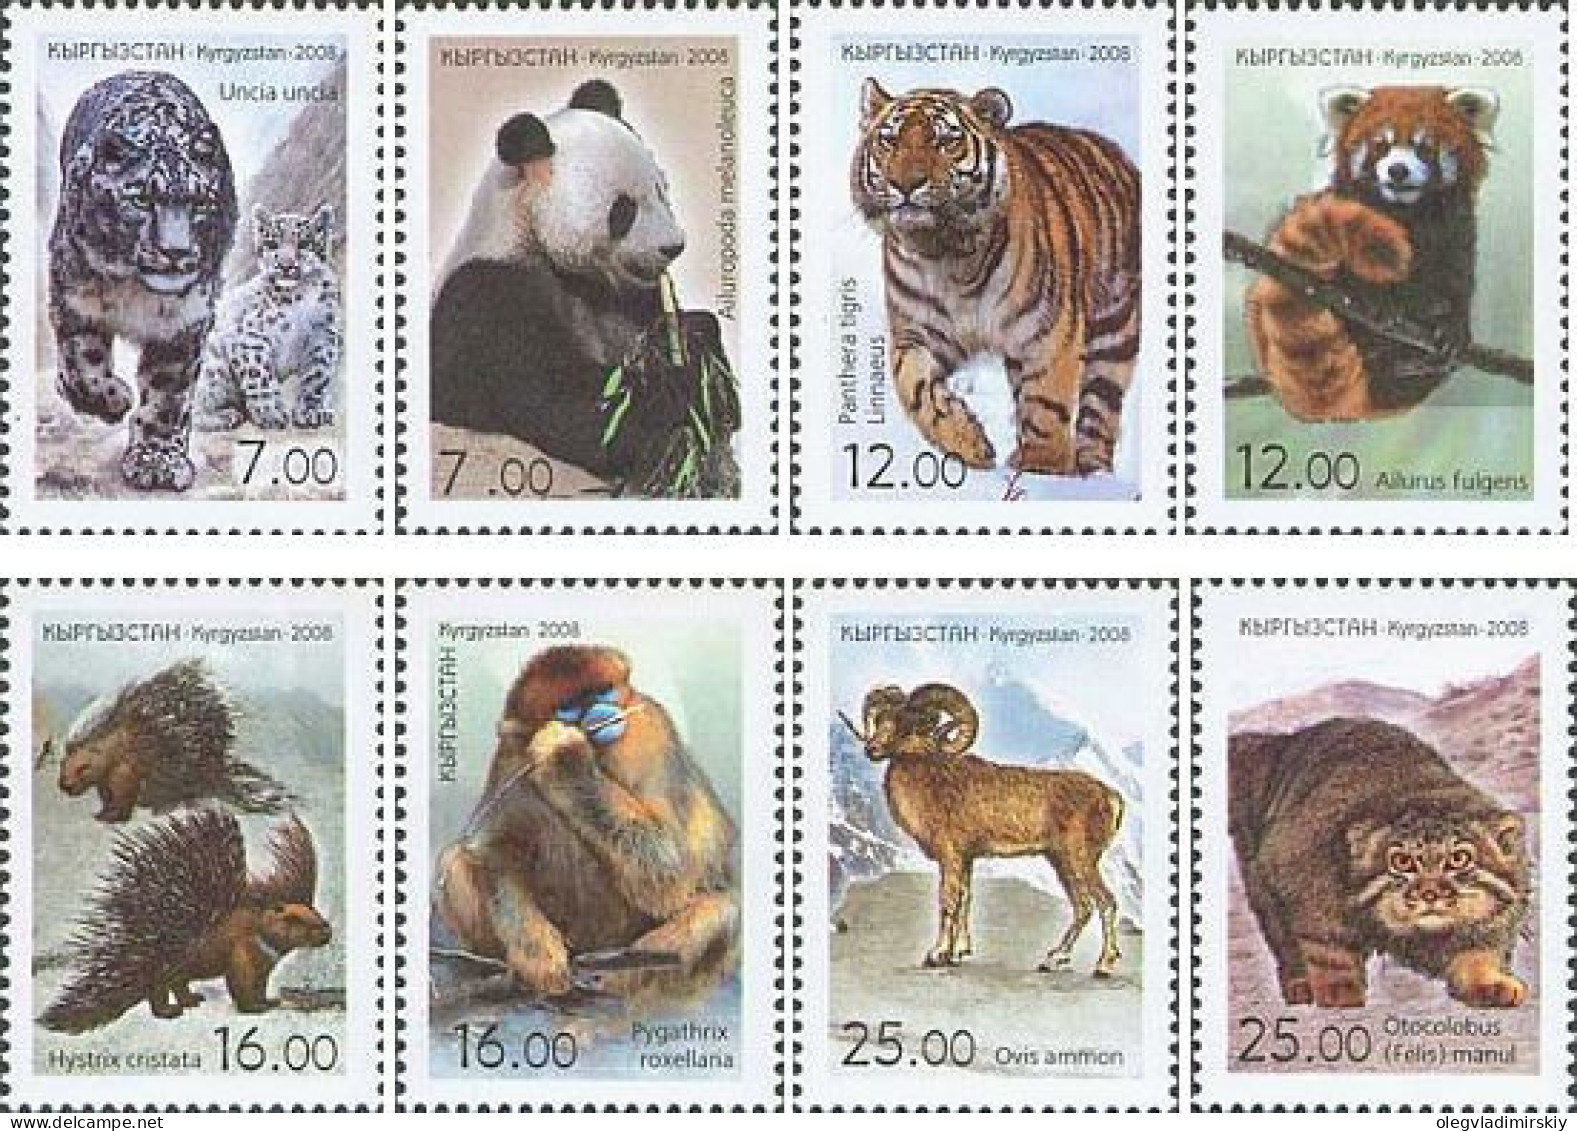 Kyrgyzstan 2008 Animals Of Asia From The Red Book Set Of 8 Perforated Stamps MNH - Raubkatzen